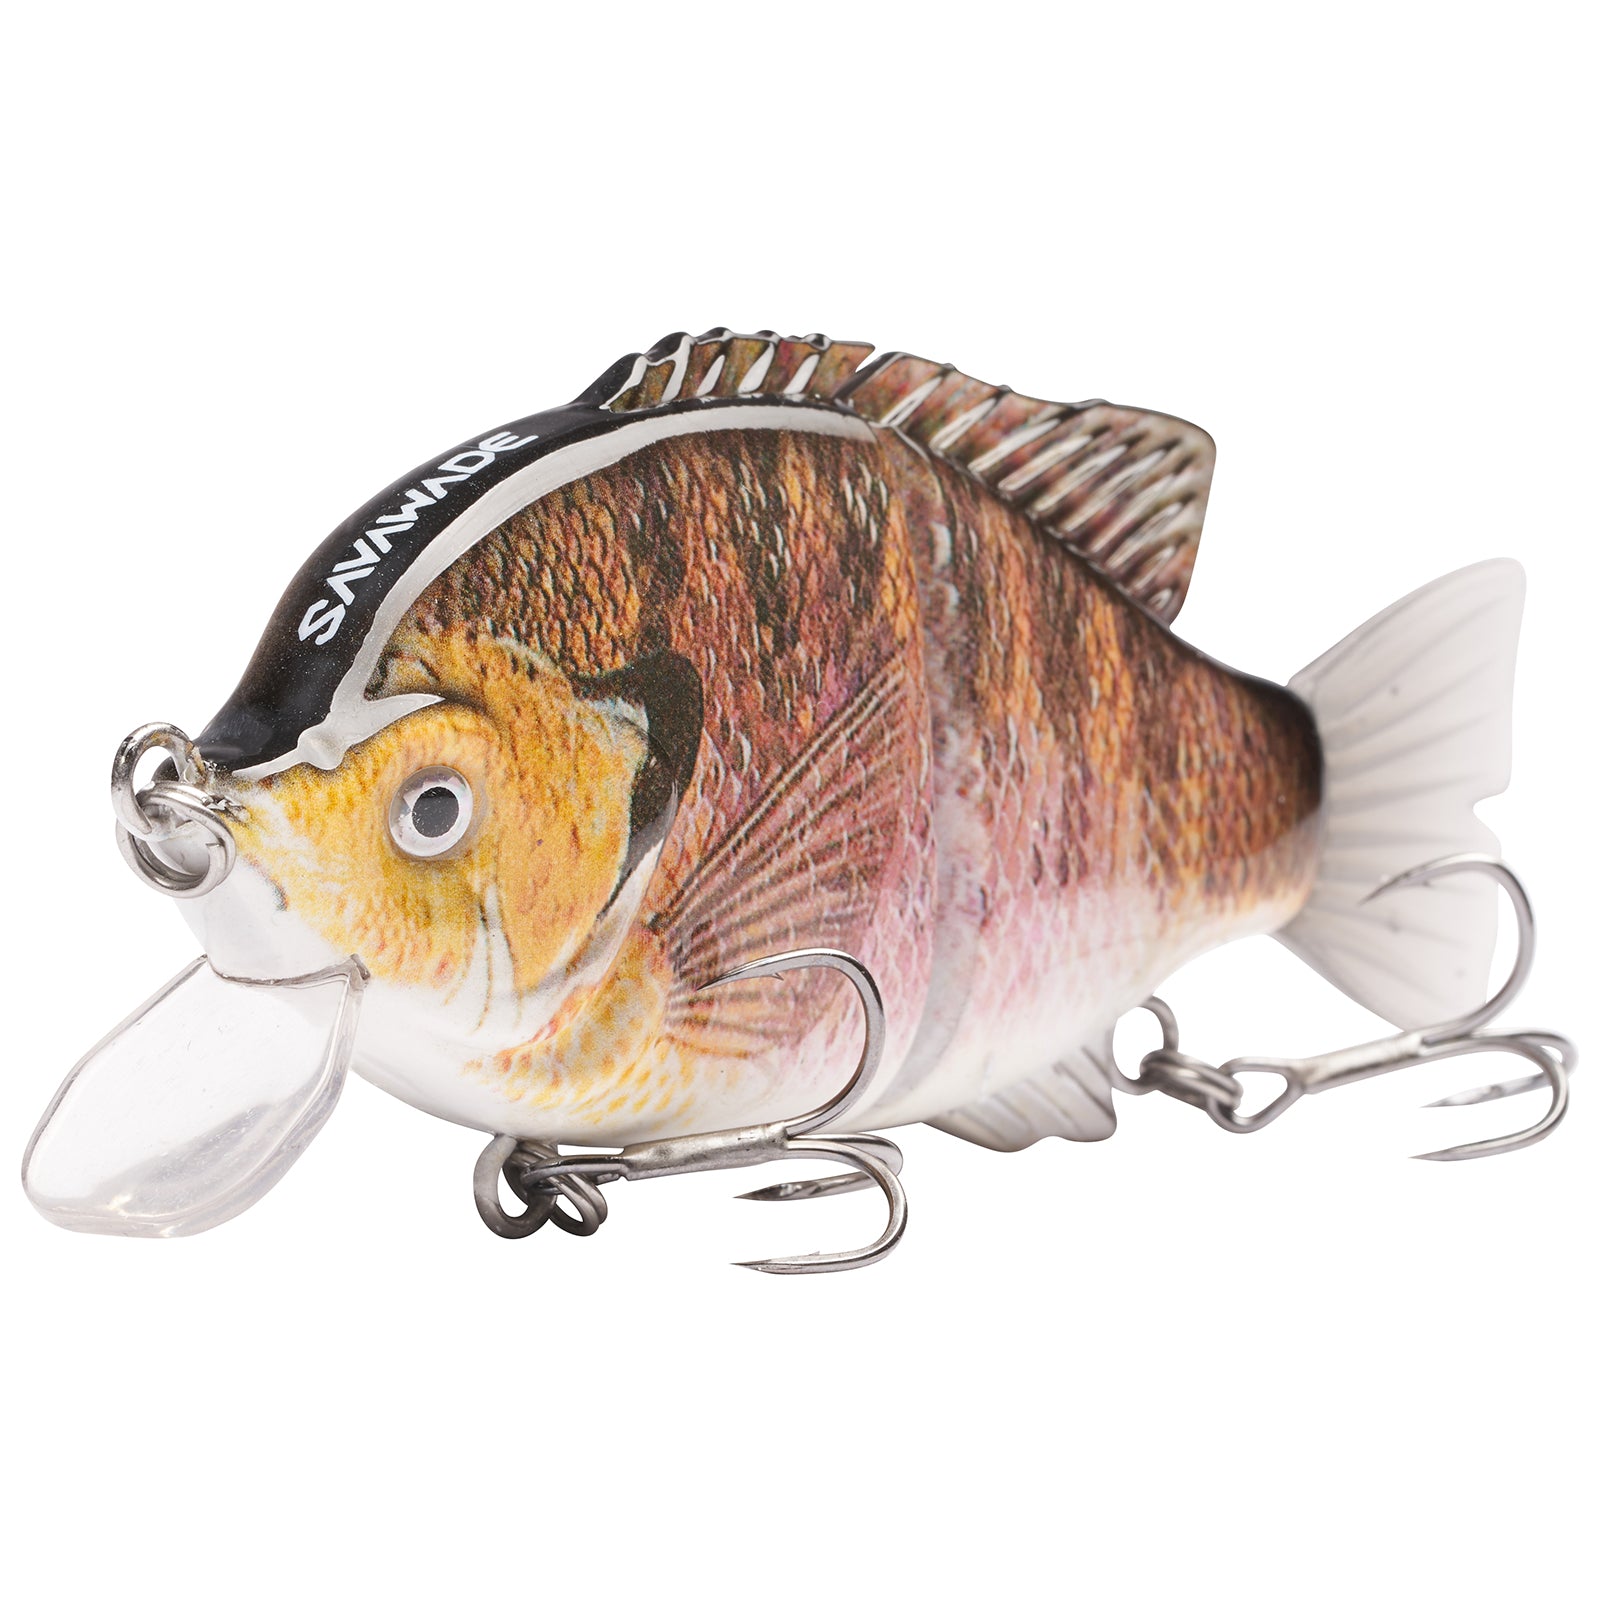 Biosic Swimbait Fishing Lures for Bass Trout Perch Freshwater